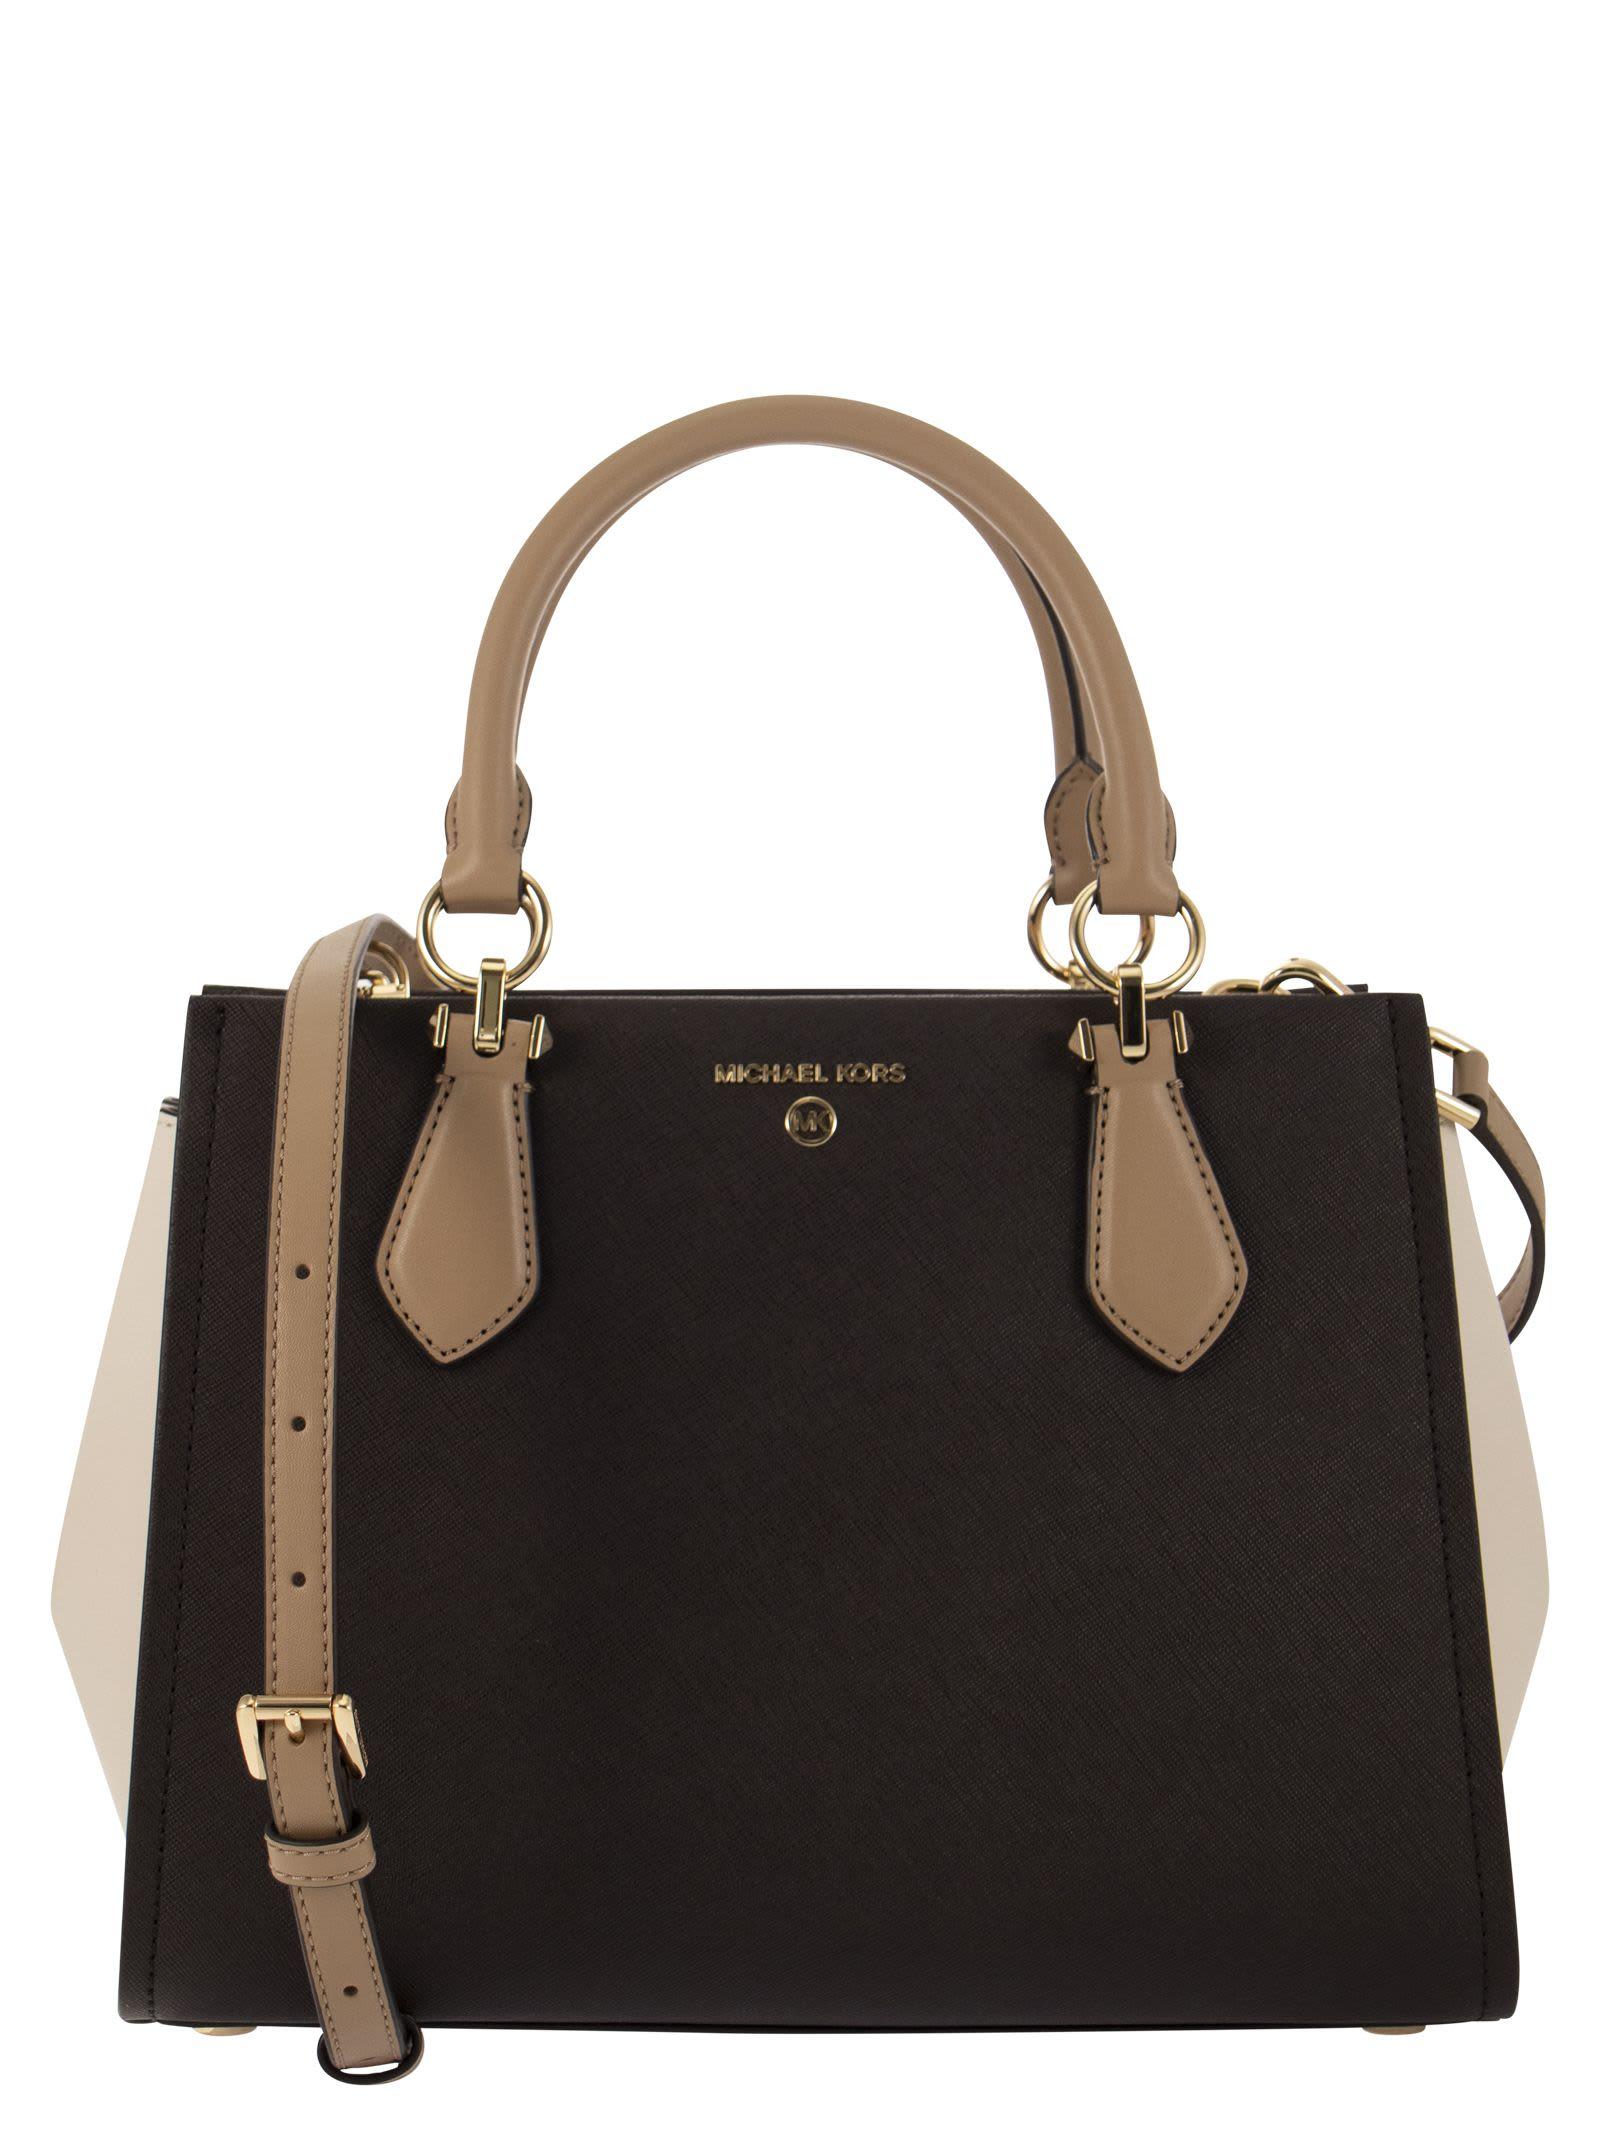 MICHAEL KORS Marilyn Medium Saffiano Leather Tote Bag for Sale in